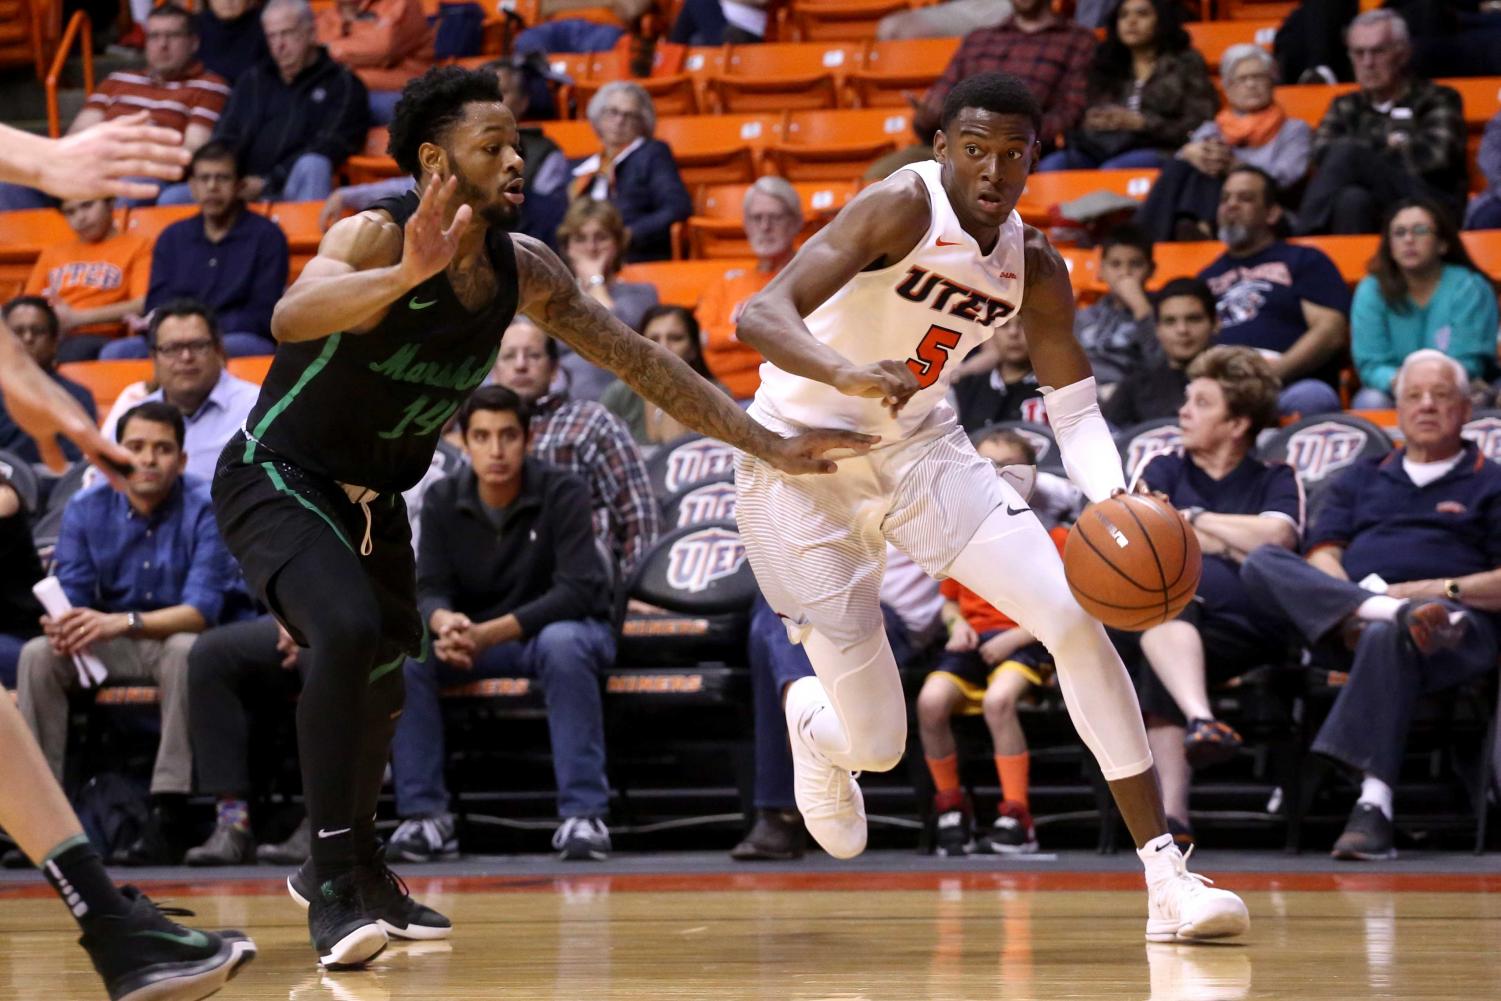 Thundering+Herd+pull+away+late+for+first-ever+win+at+UTEP